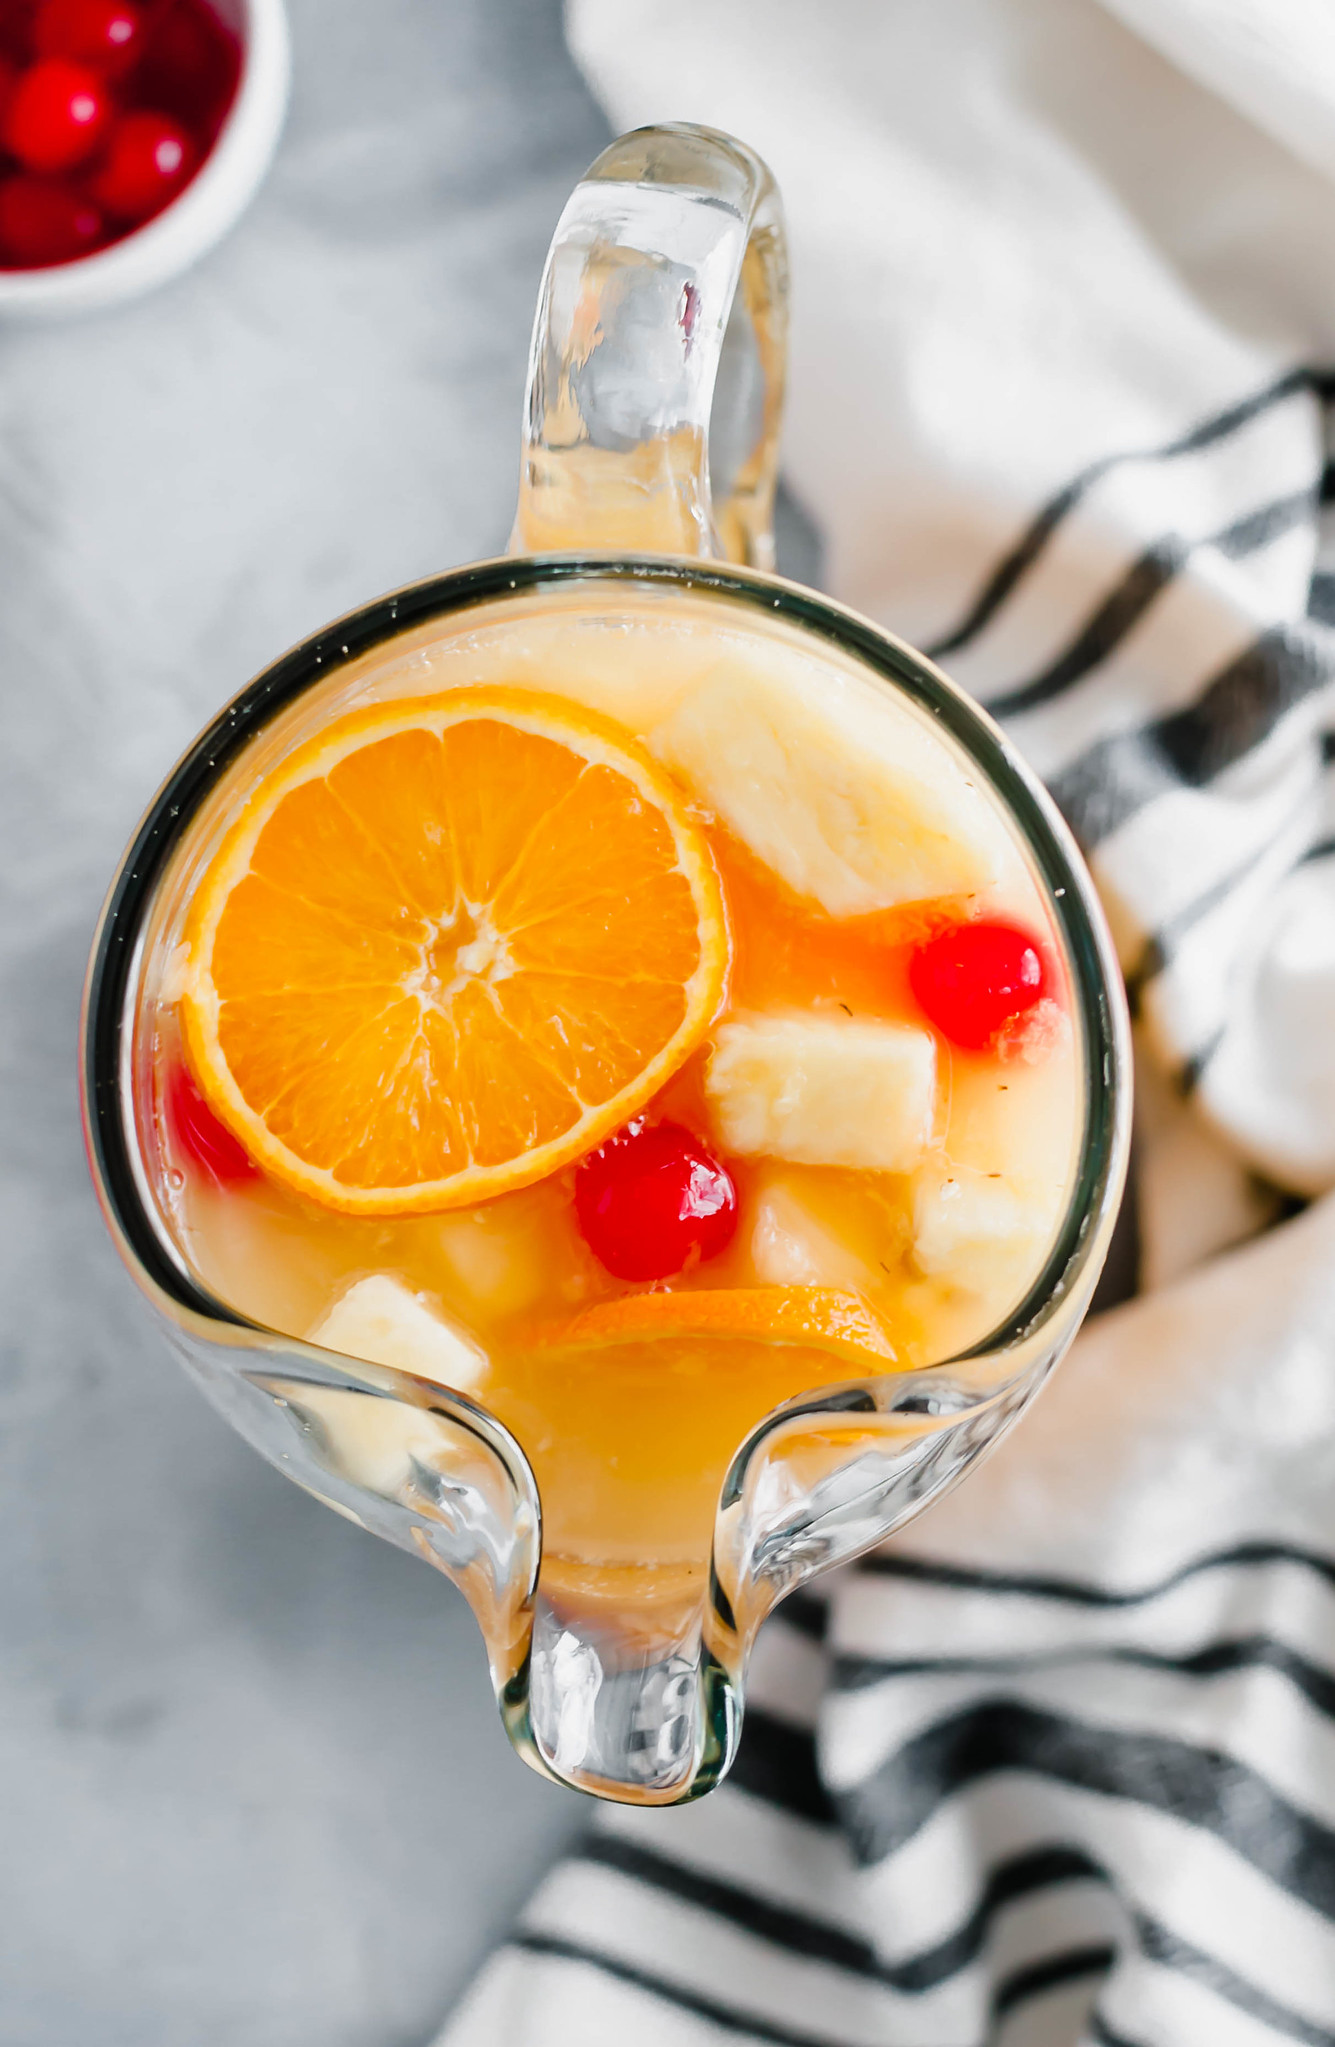 Warm weather calls for this refreshing, tropical Summer Sangria. Sweet moscato wine, tropical juices, coconut rum and delicious fruit meld together to create the tastiest summer drink.